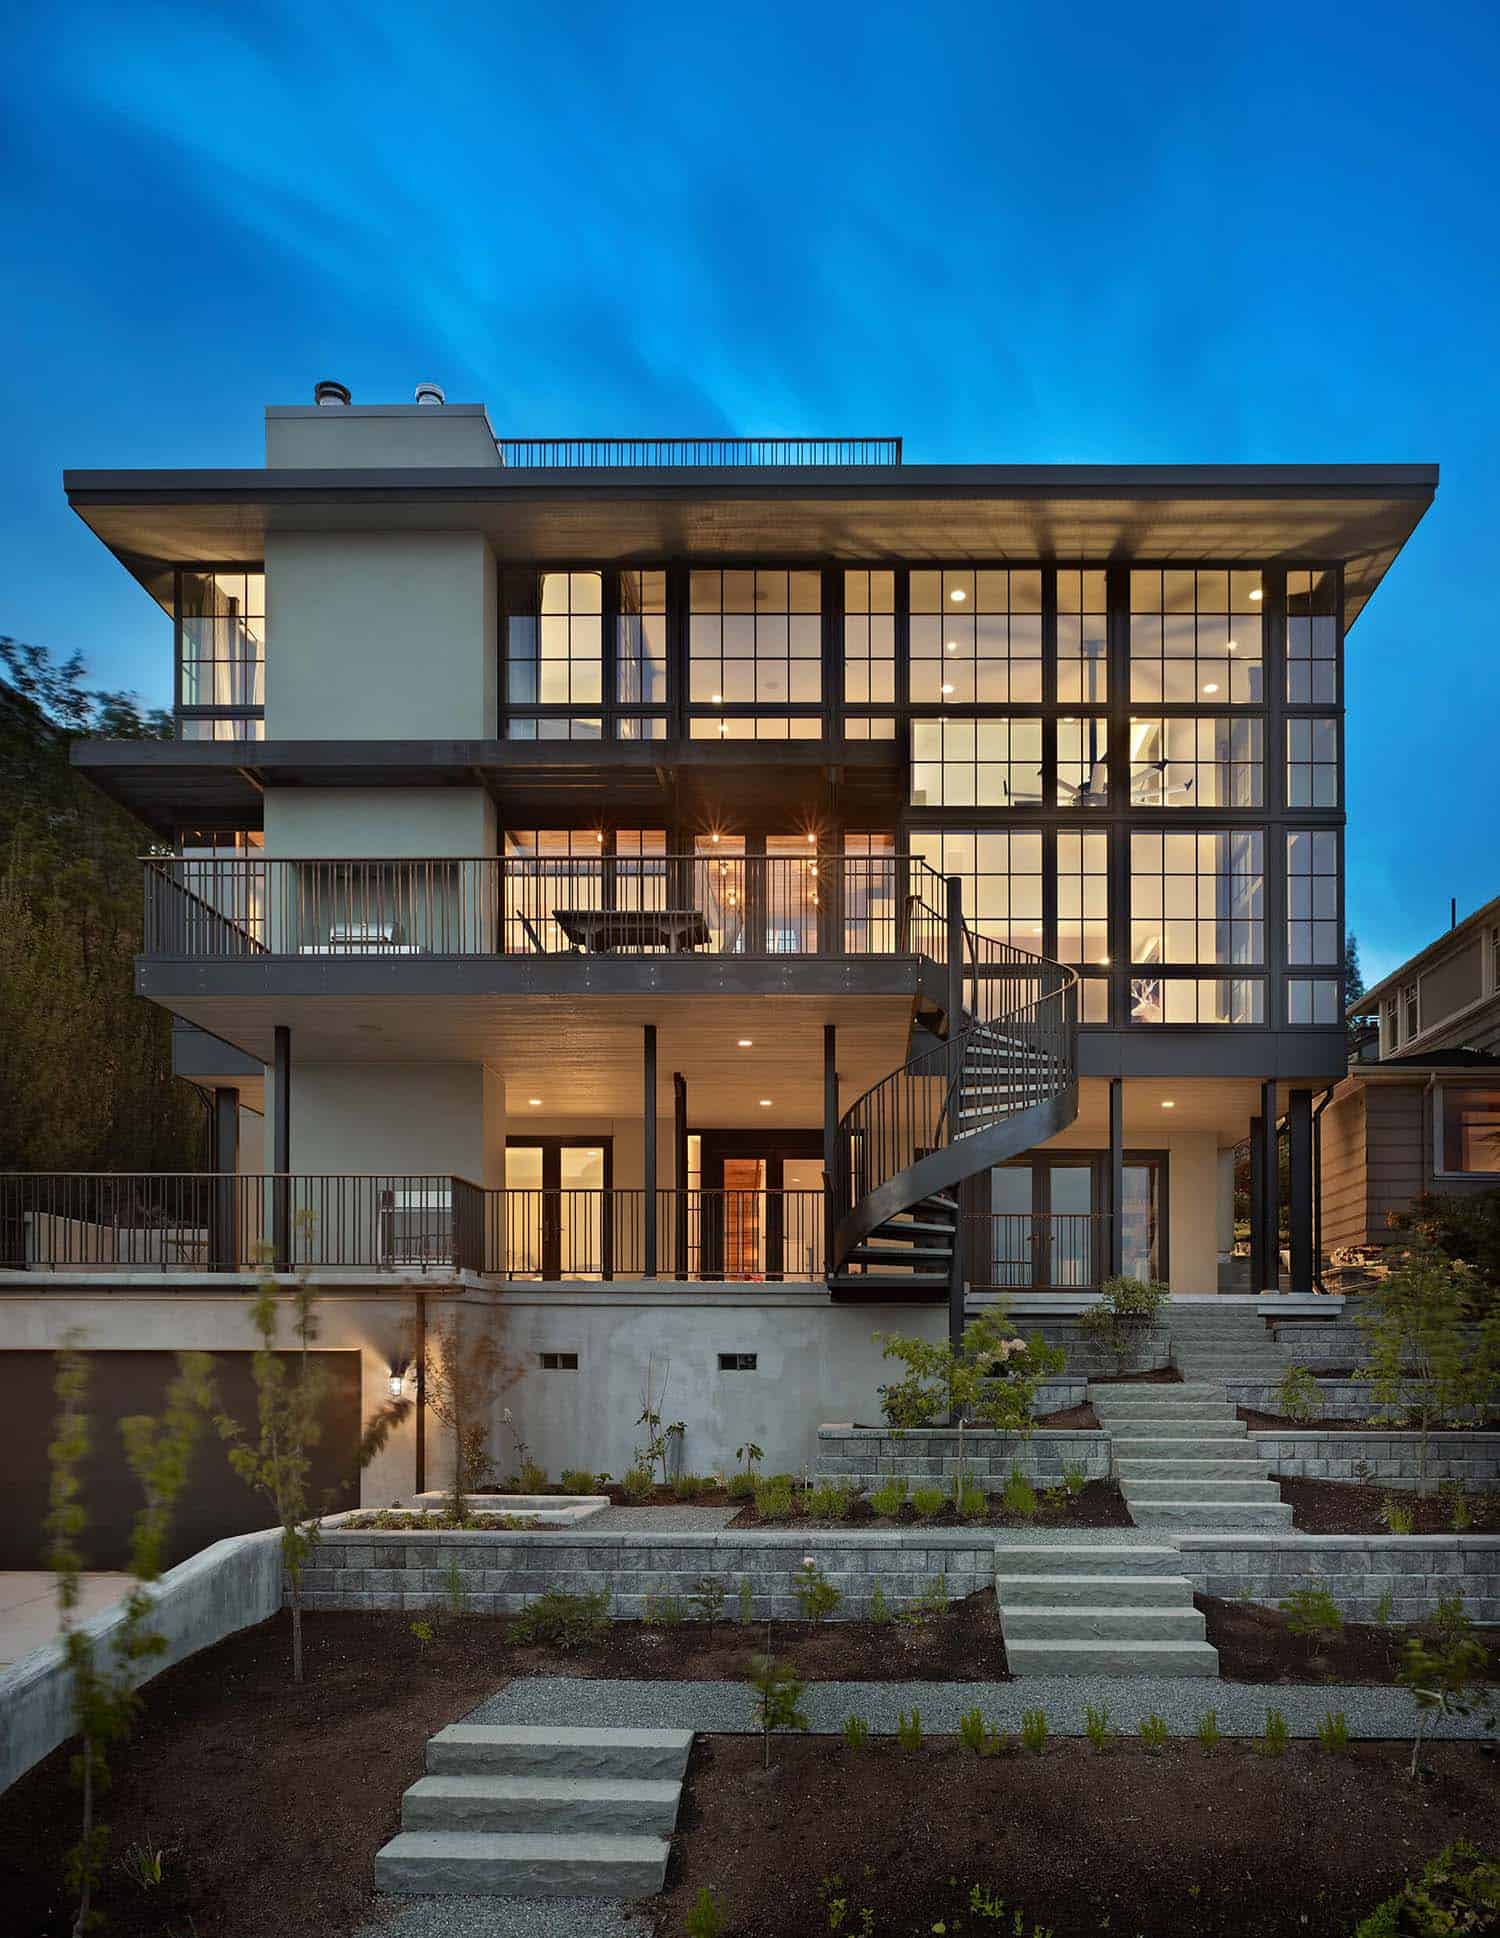 This beautiful industrial fashionable refuge has breathtaking Seattle skyline views